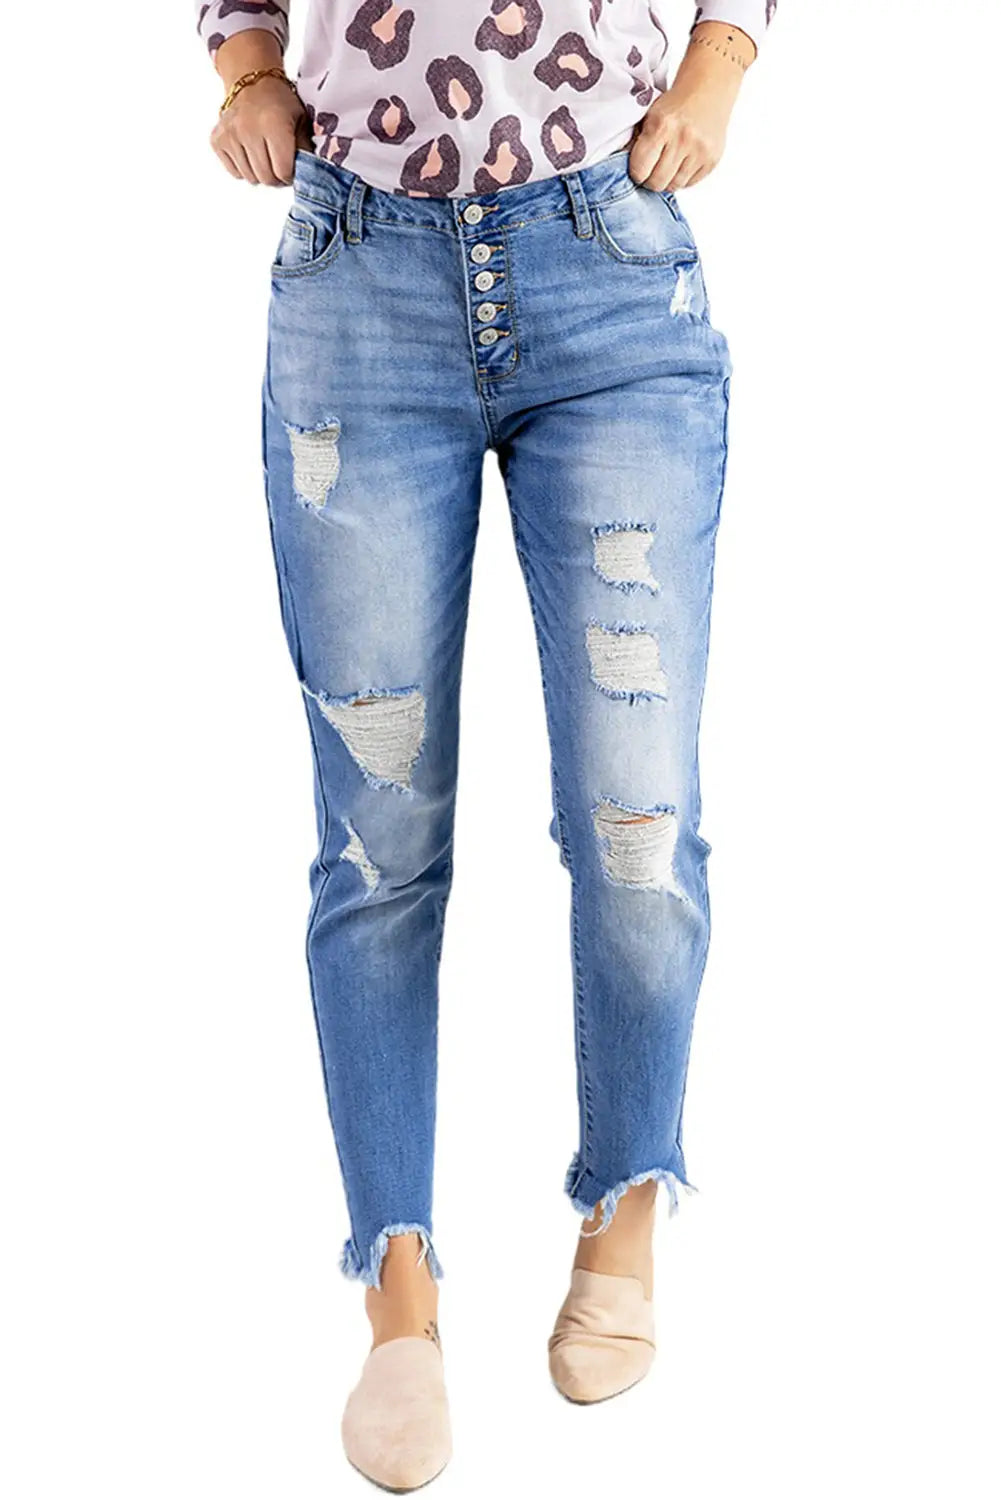 Sky blue high rise button front frayed ankle skinny jeans